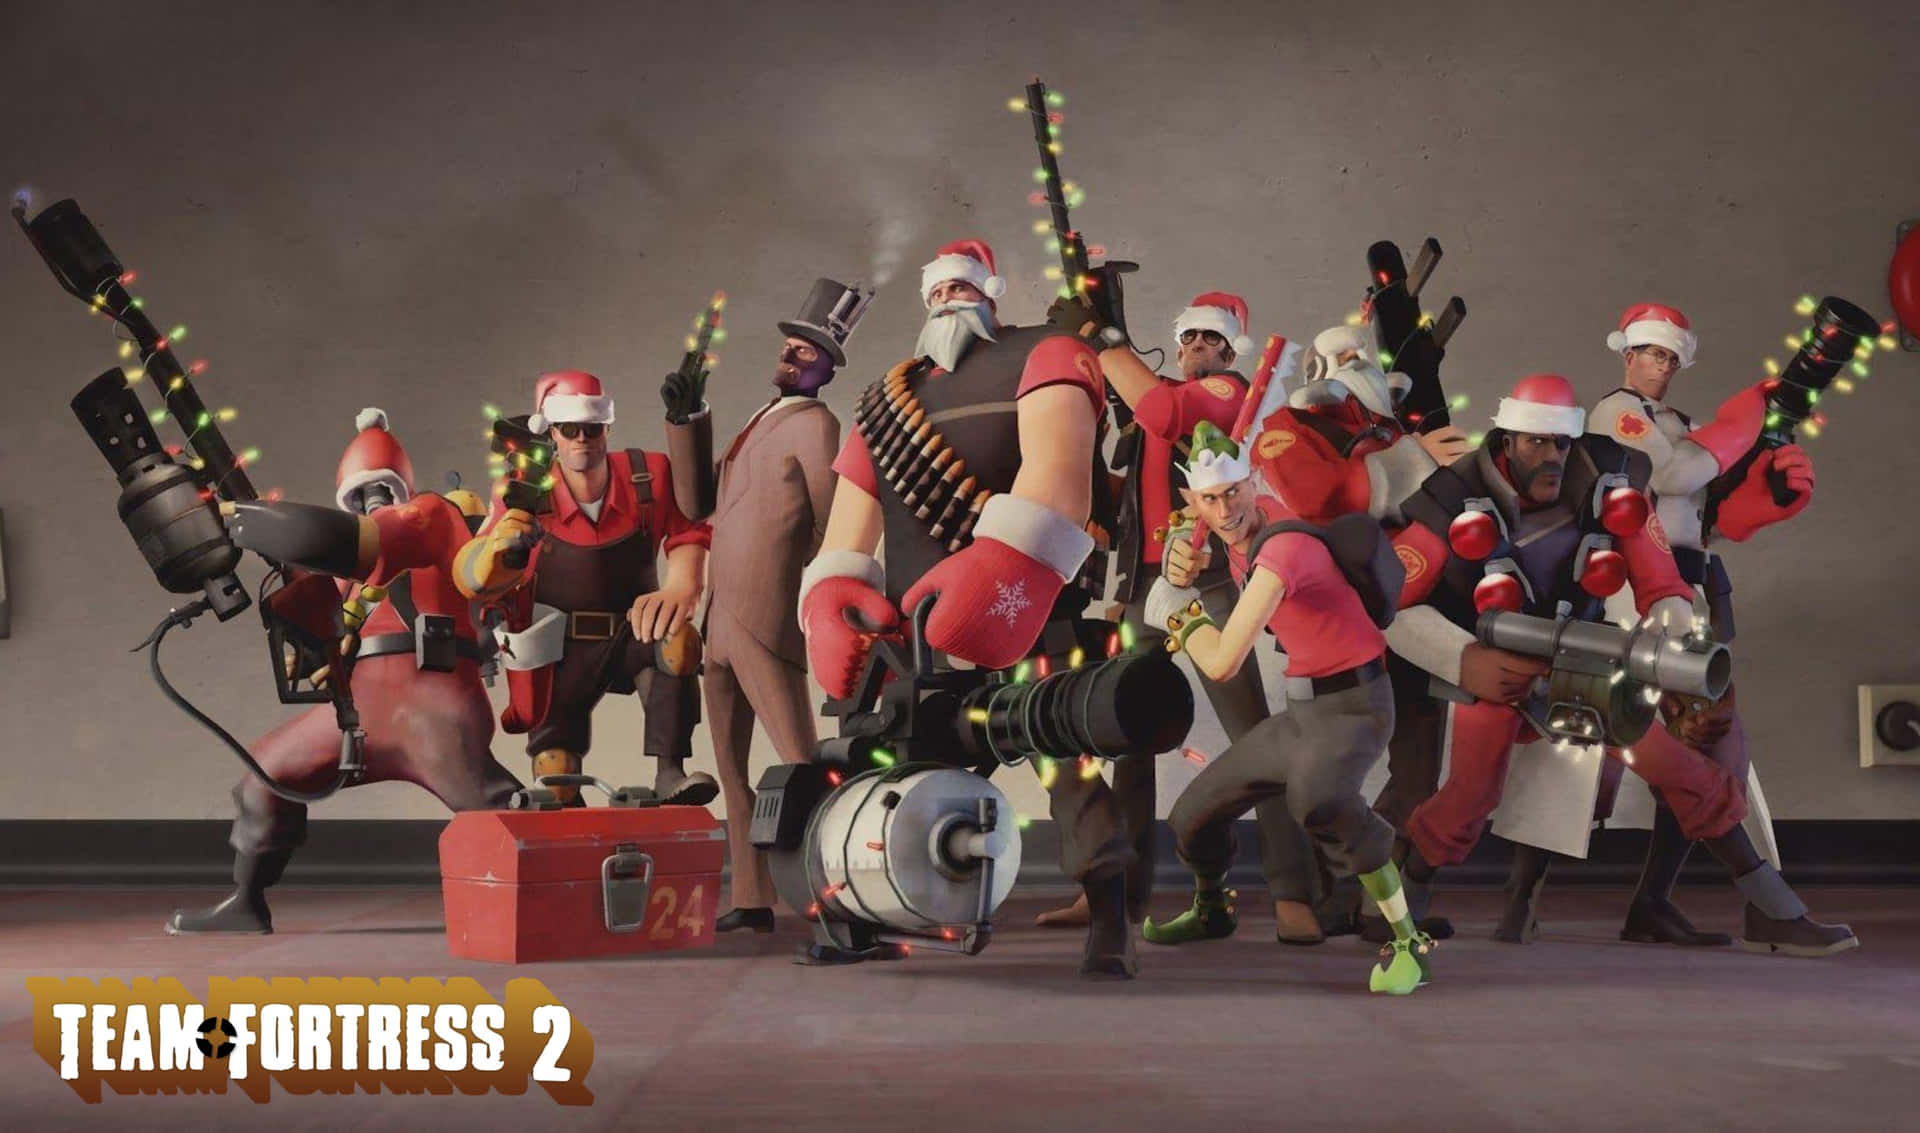 High Resolution 2440x1440 TF2 Background Image